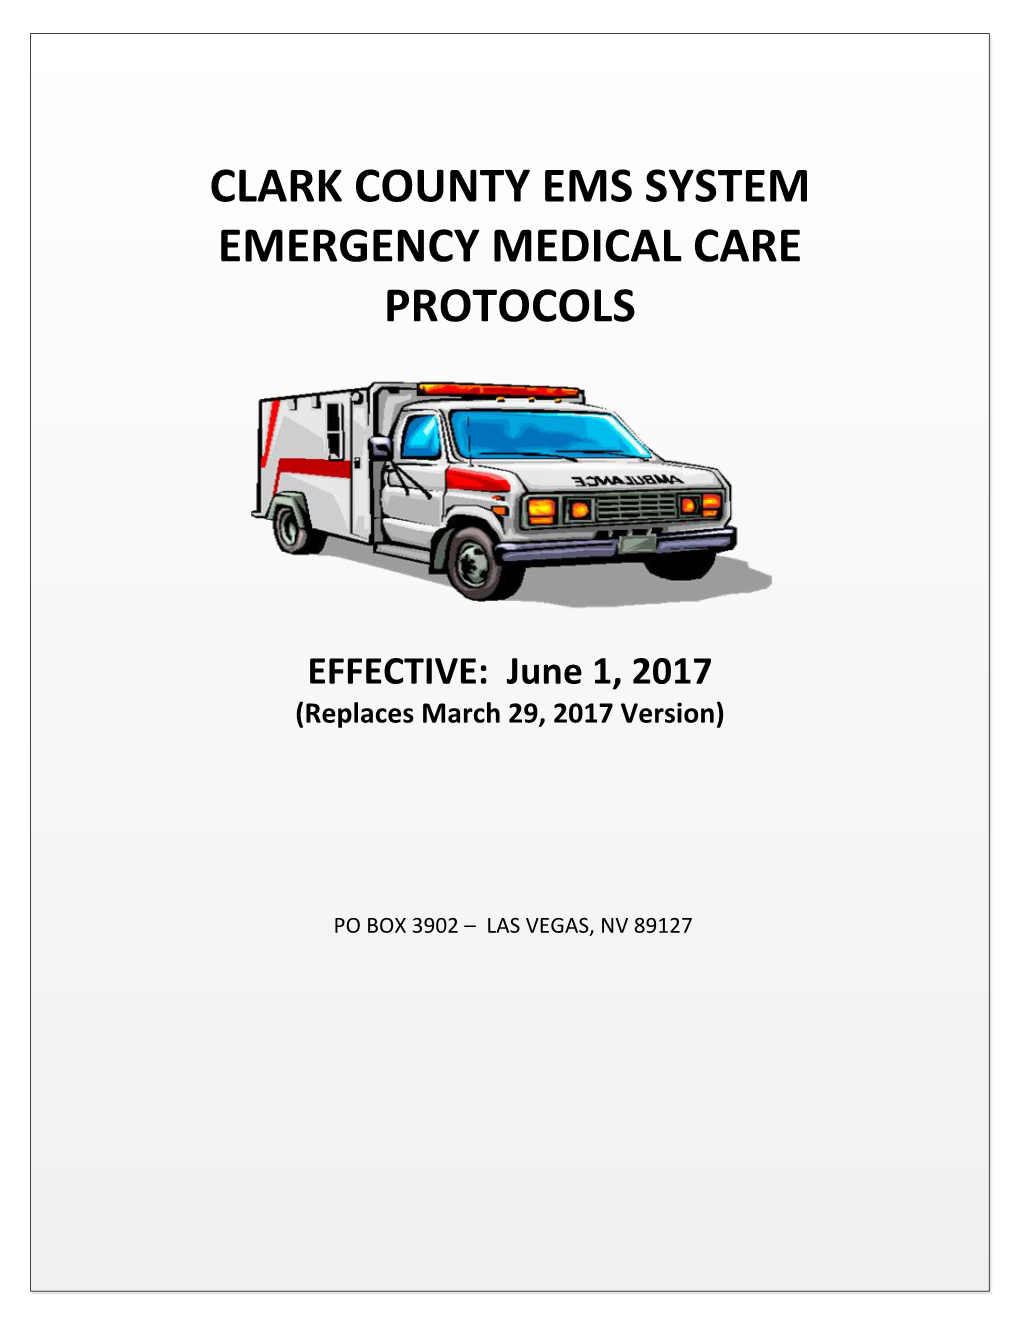 Clark County Ems System Emergency Medical Care Protocols